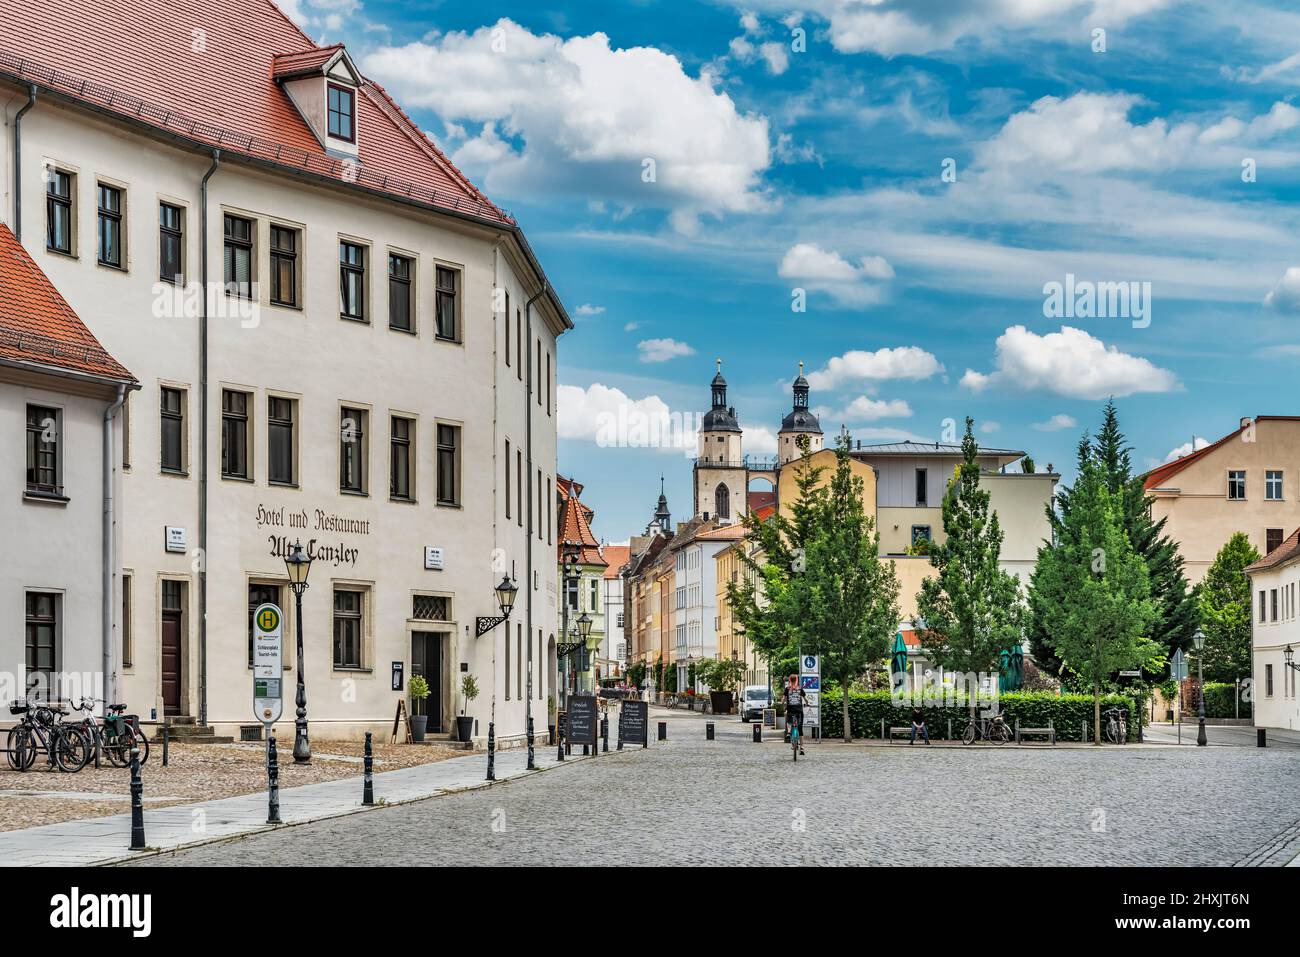 View from the Schlossplatz to the Wittenberg market square and the towers of the St. Mary's Church, Lutherstadt Wittenberg, Saxony-Anhalt, Germany, Eu Stock Photo